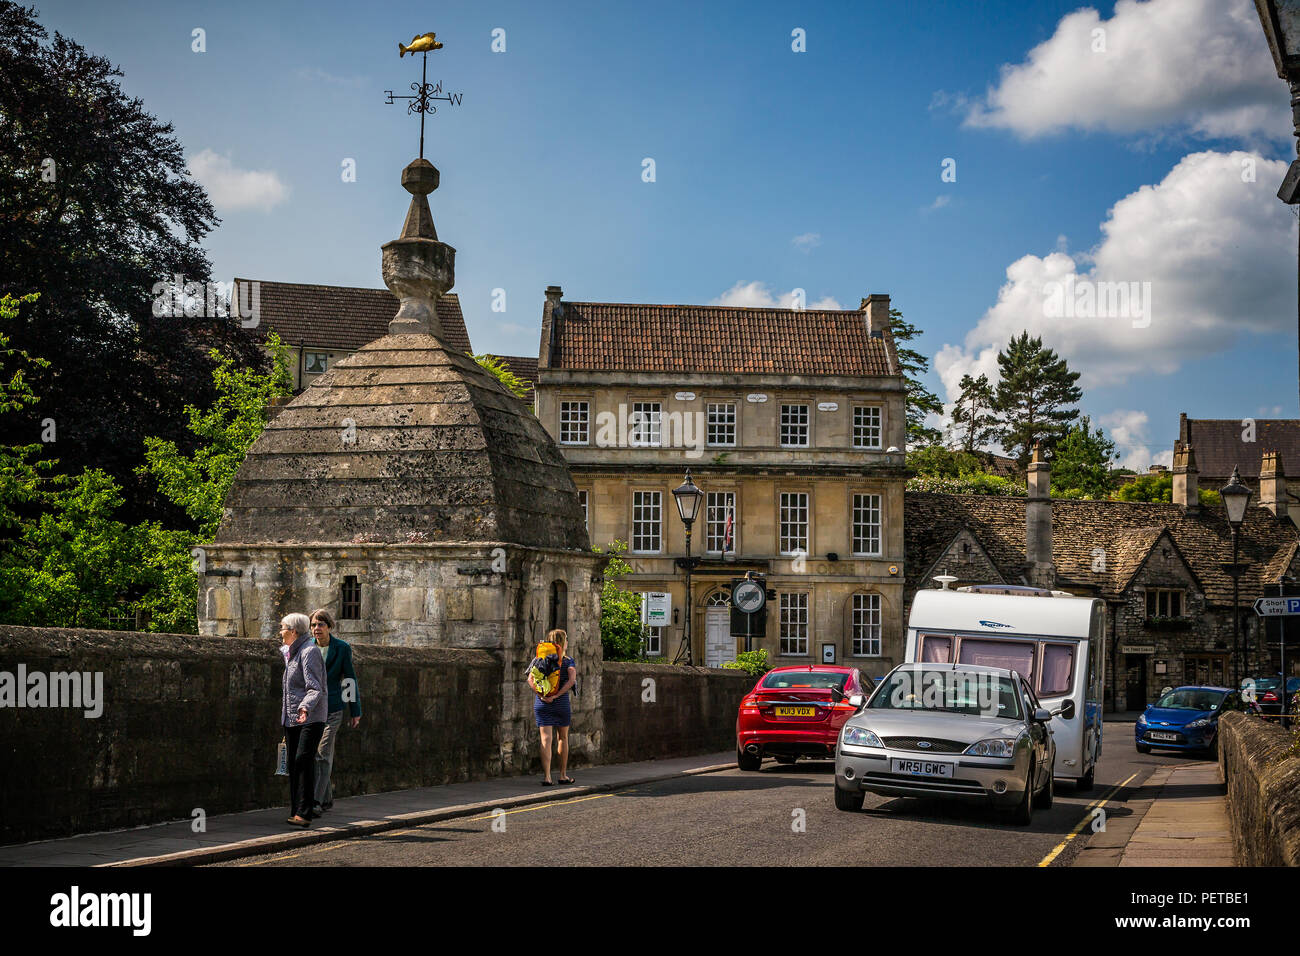 Bridge over the River Avon and medieval prison cell in Bradford on Avon, Wiltshire, UK on 25 June 2013 Stock Photo